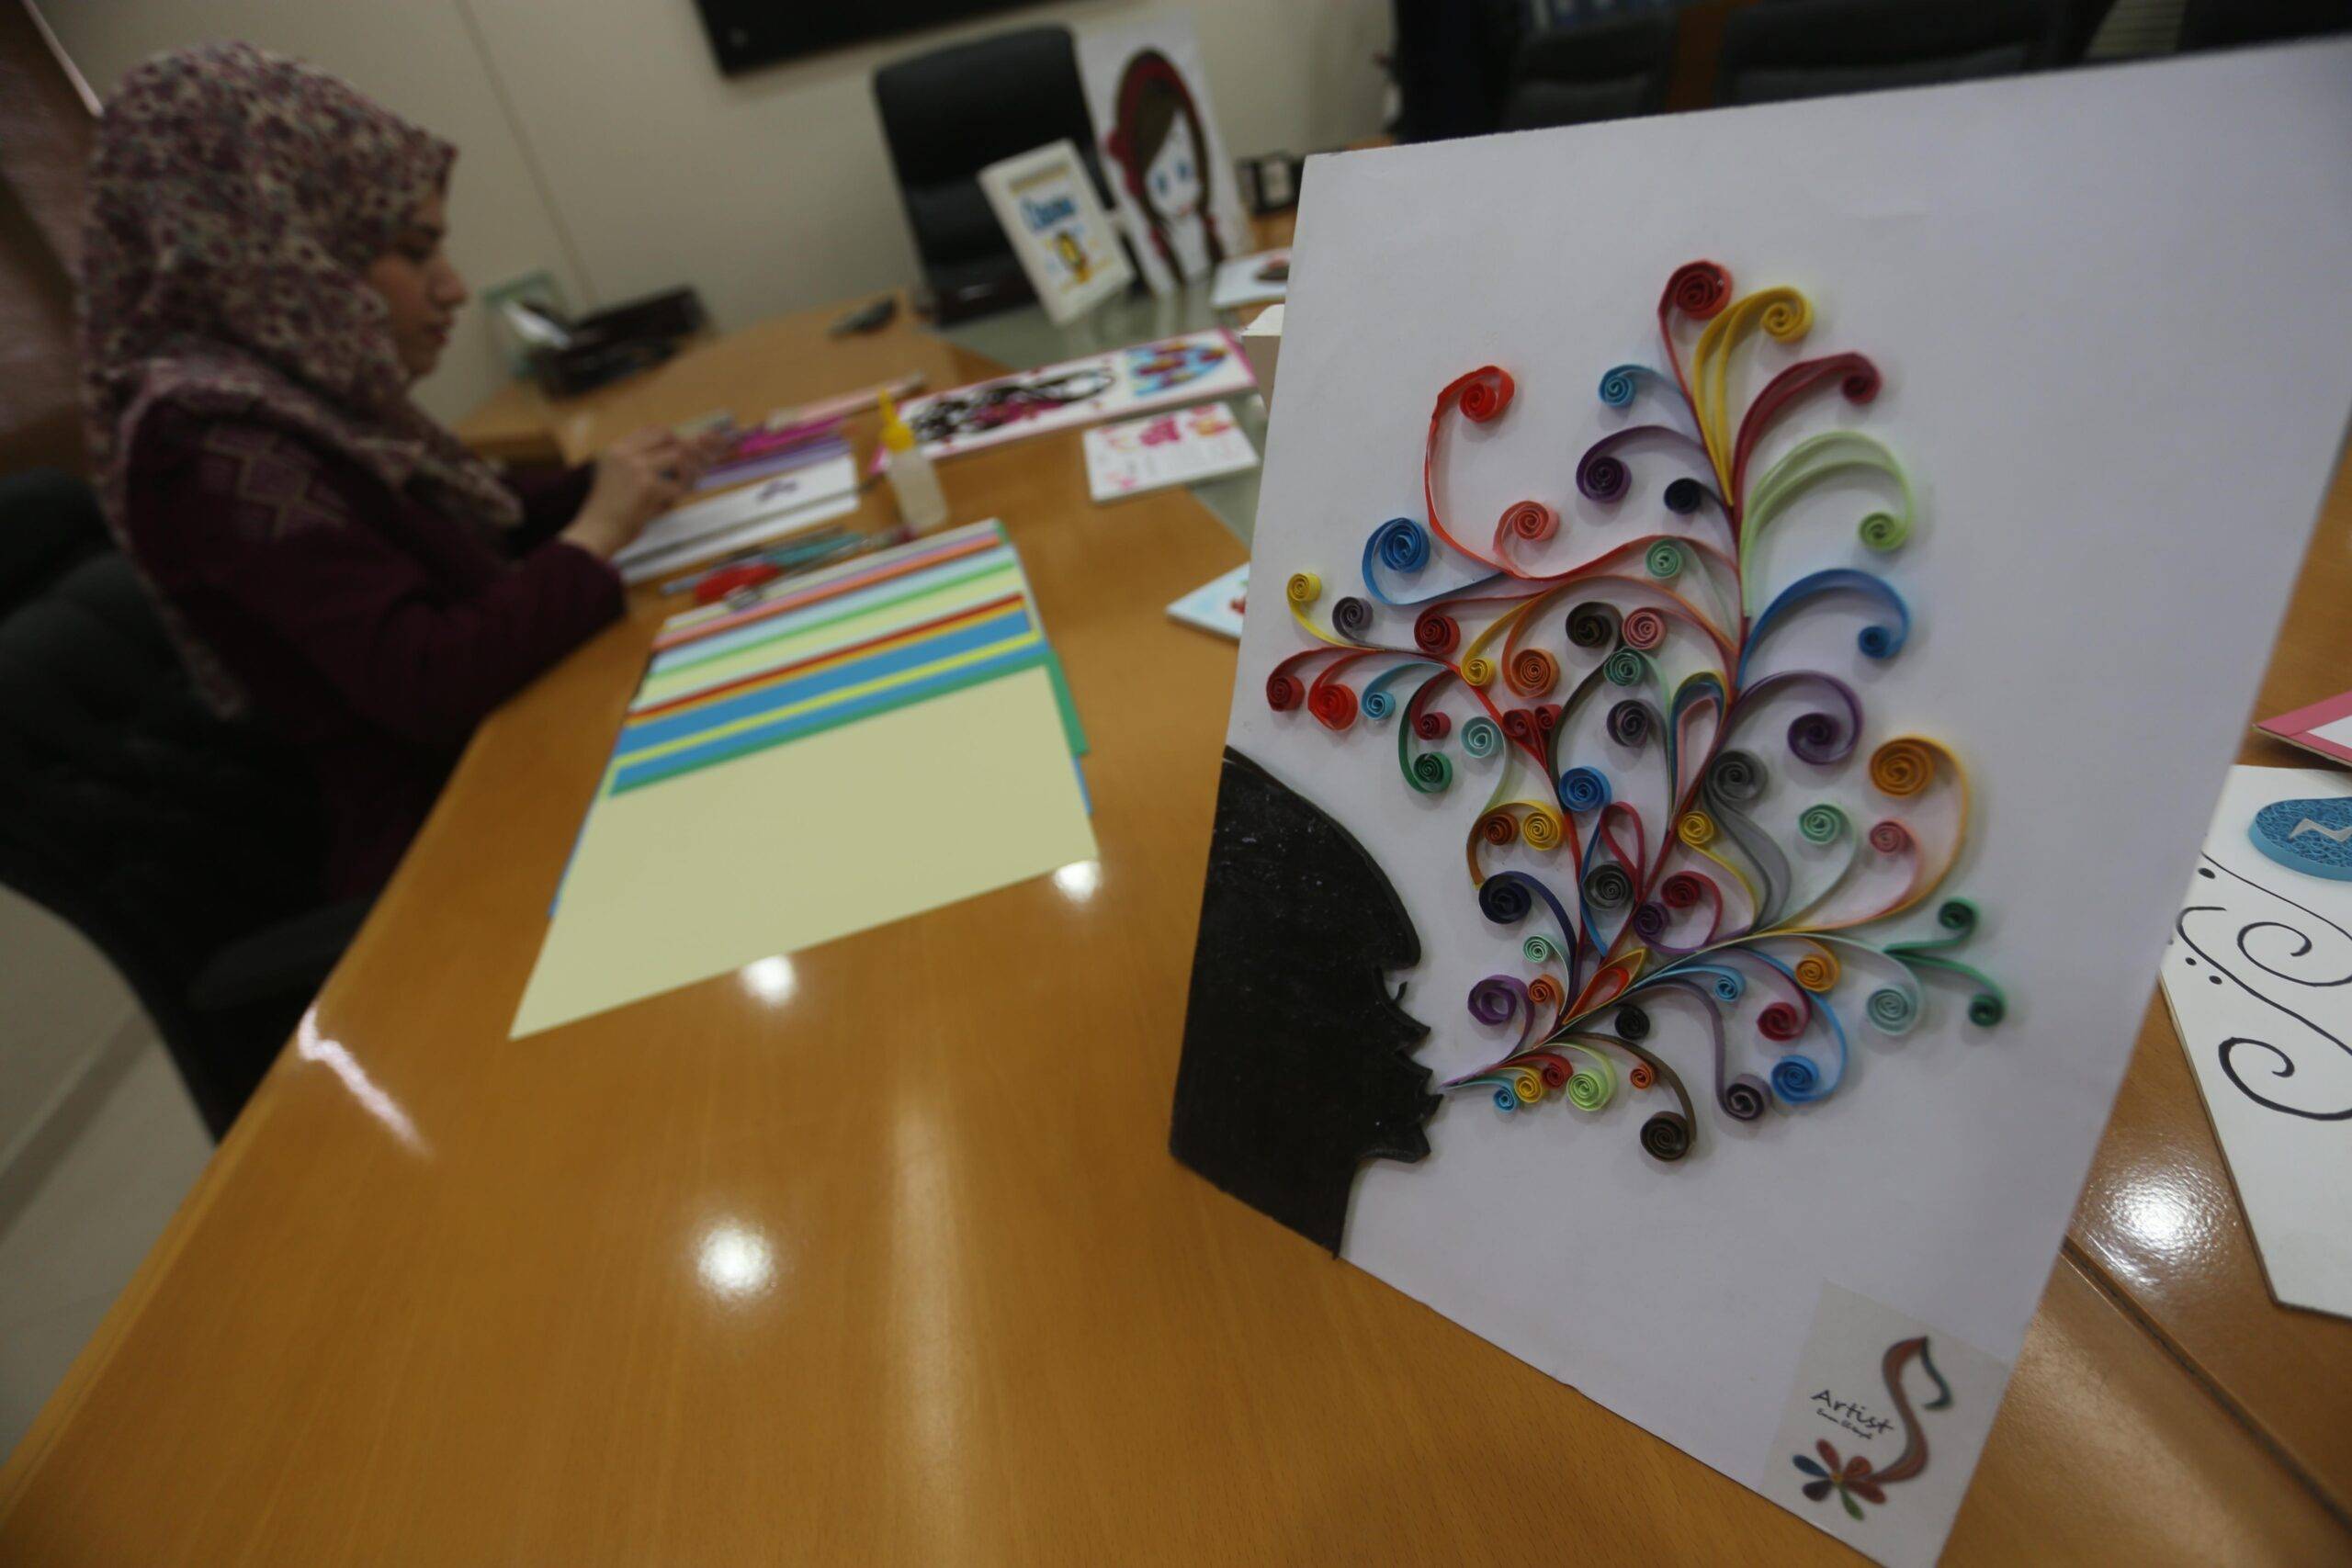 Gaza artist, Iman Al-Tayeb, cuts coloured paper into narrow strips and then curls and glues them to a board to make a 3D piece of art [Mohammed Asad/Middle East Monitor]